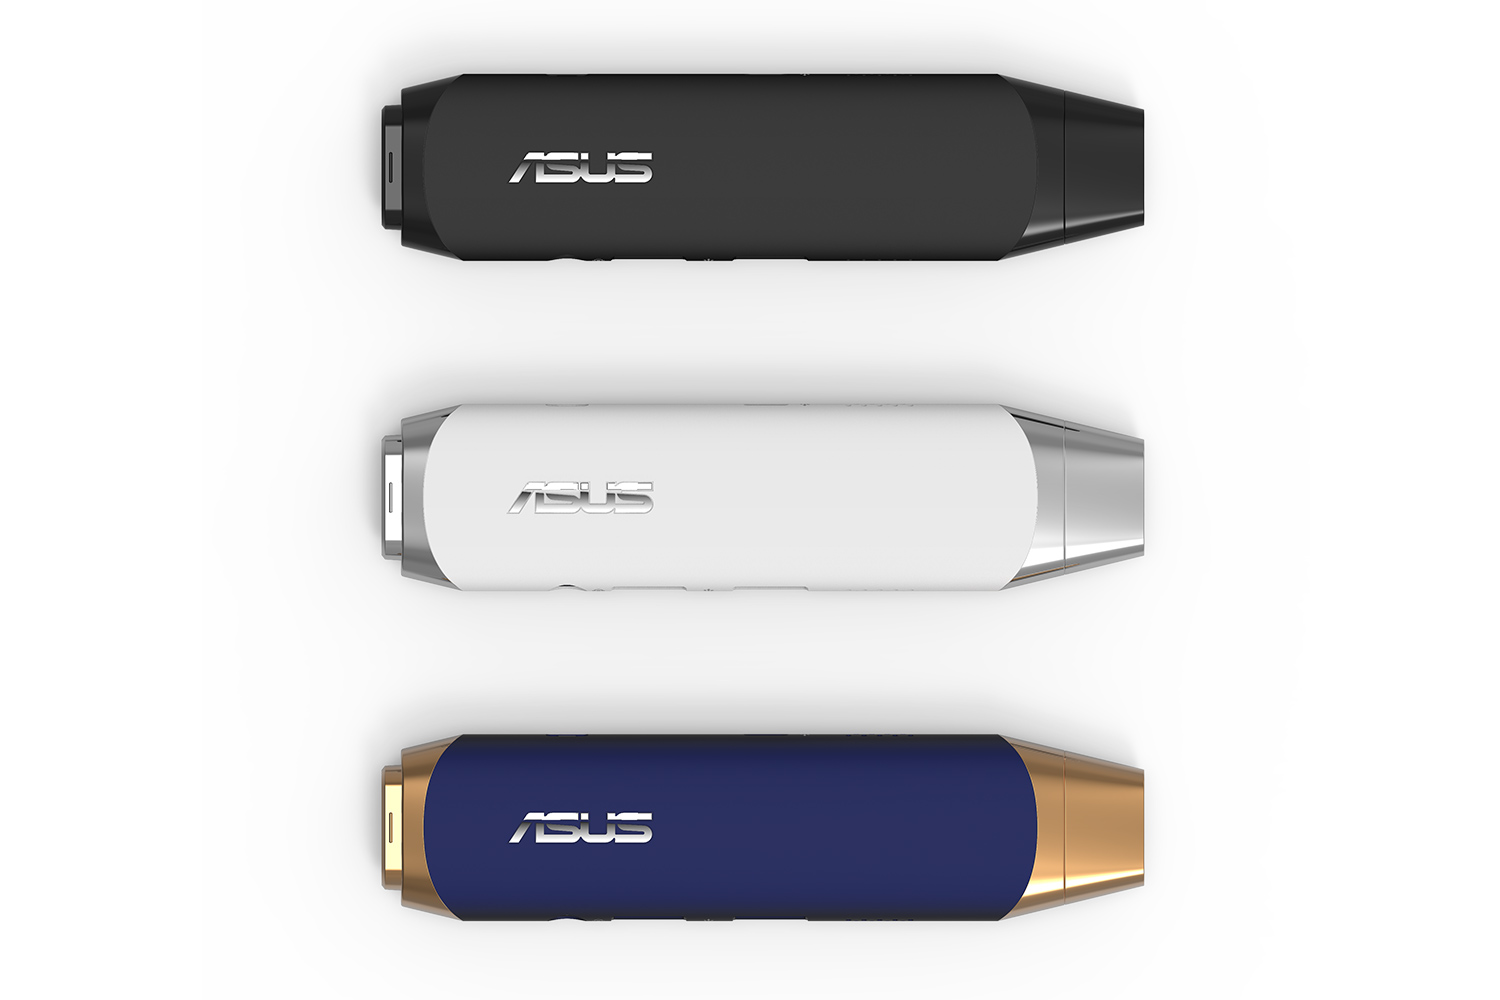 asus announces water cooled gaming laptop at ifa 2015 vivostick pc 3 colors vertical